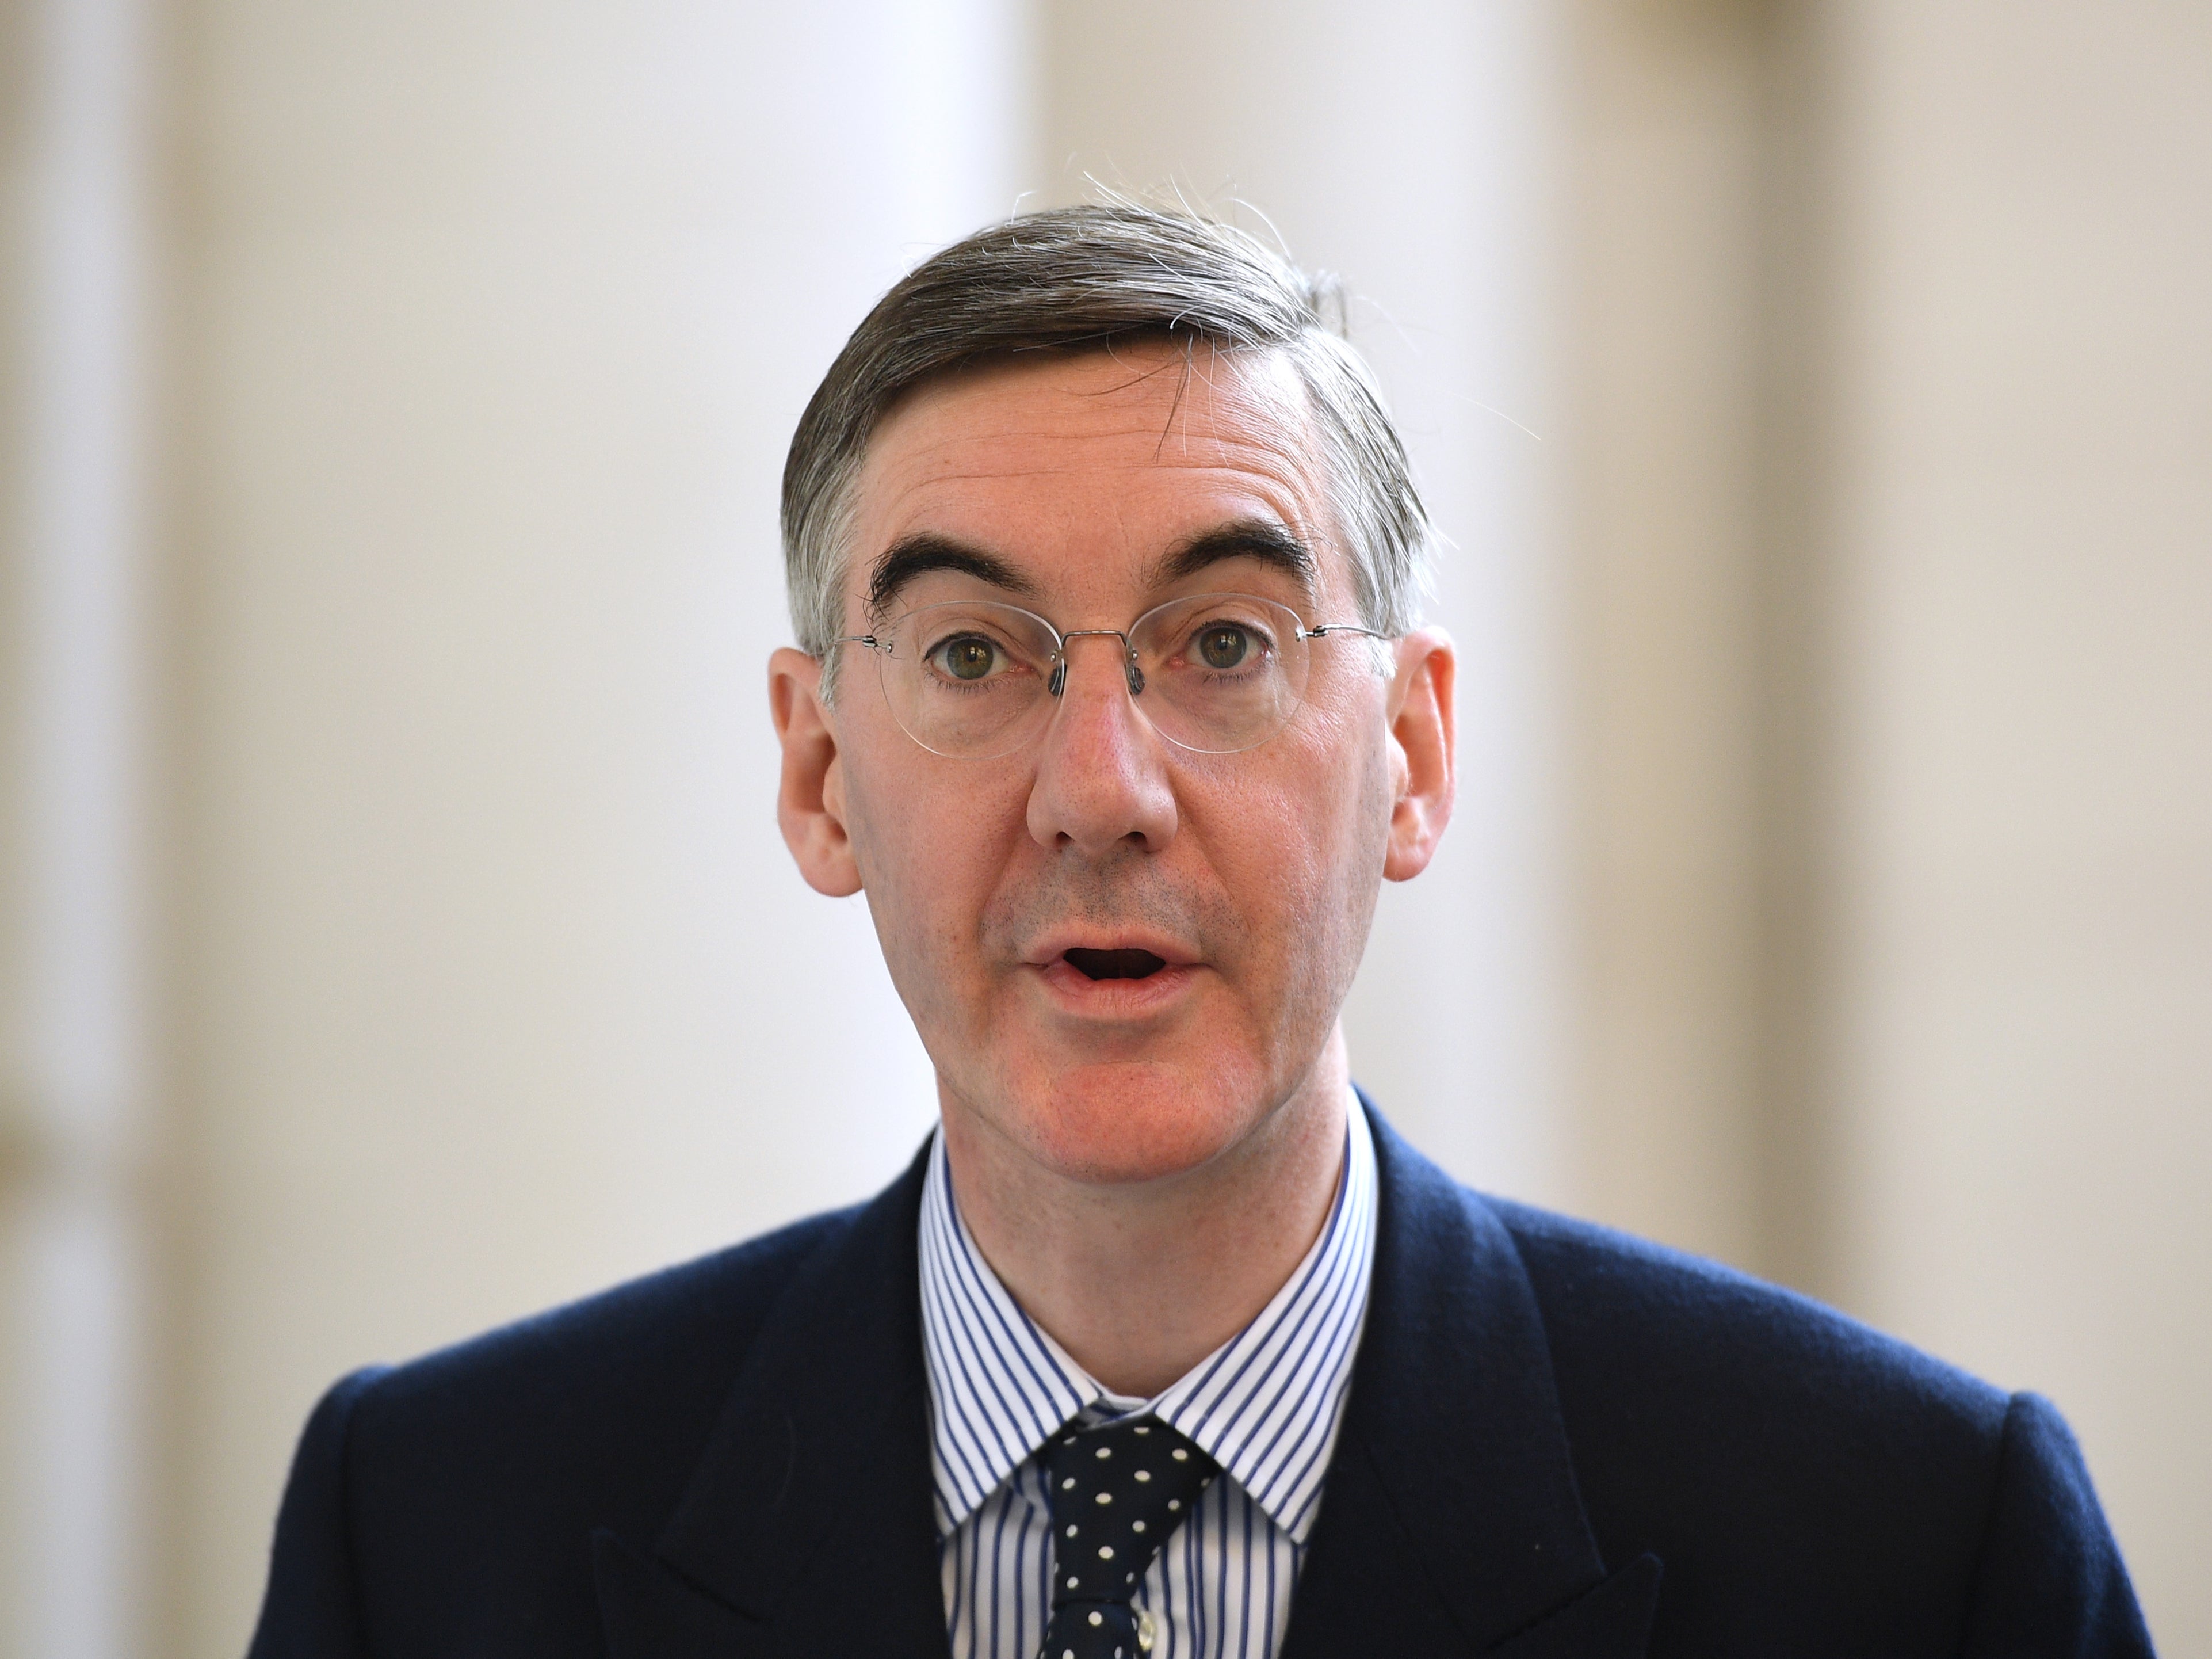 Commons leader Jacob Rees-Mogg